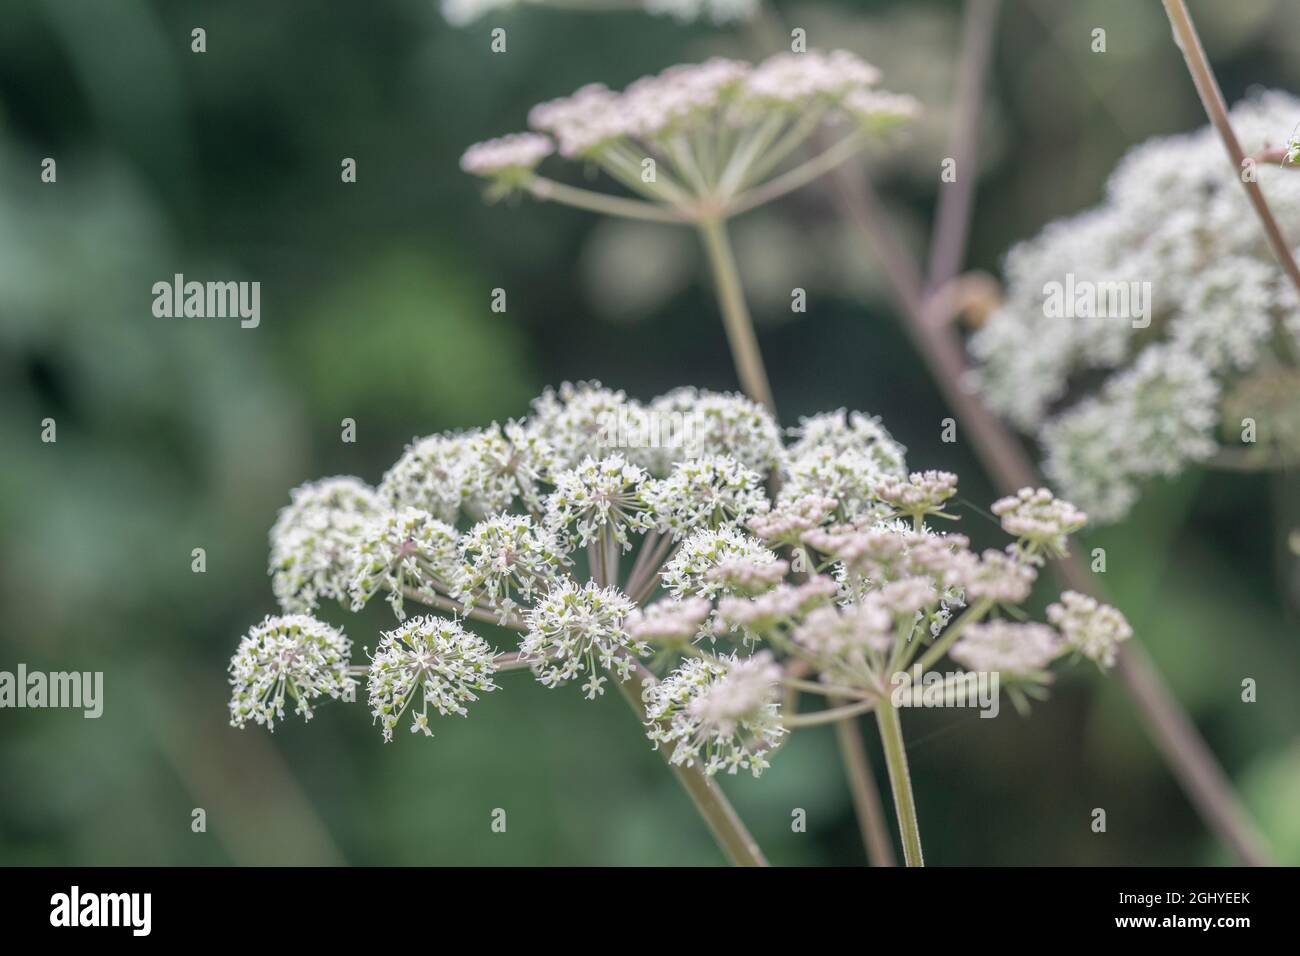 Flowering heads of Umbellifer known as Hogweed / Cow Parsnip / Heracleum sphondylium Common weed, the sap of which may blister skin in sunlight. Stock Photo